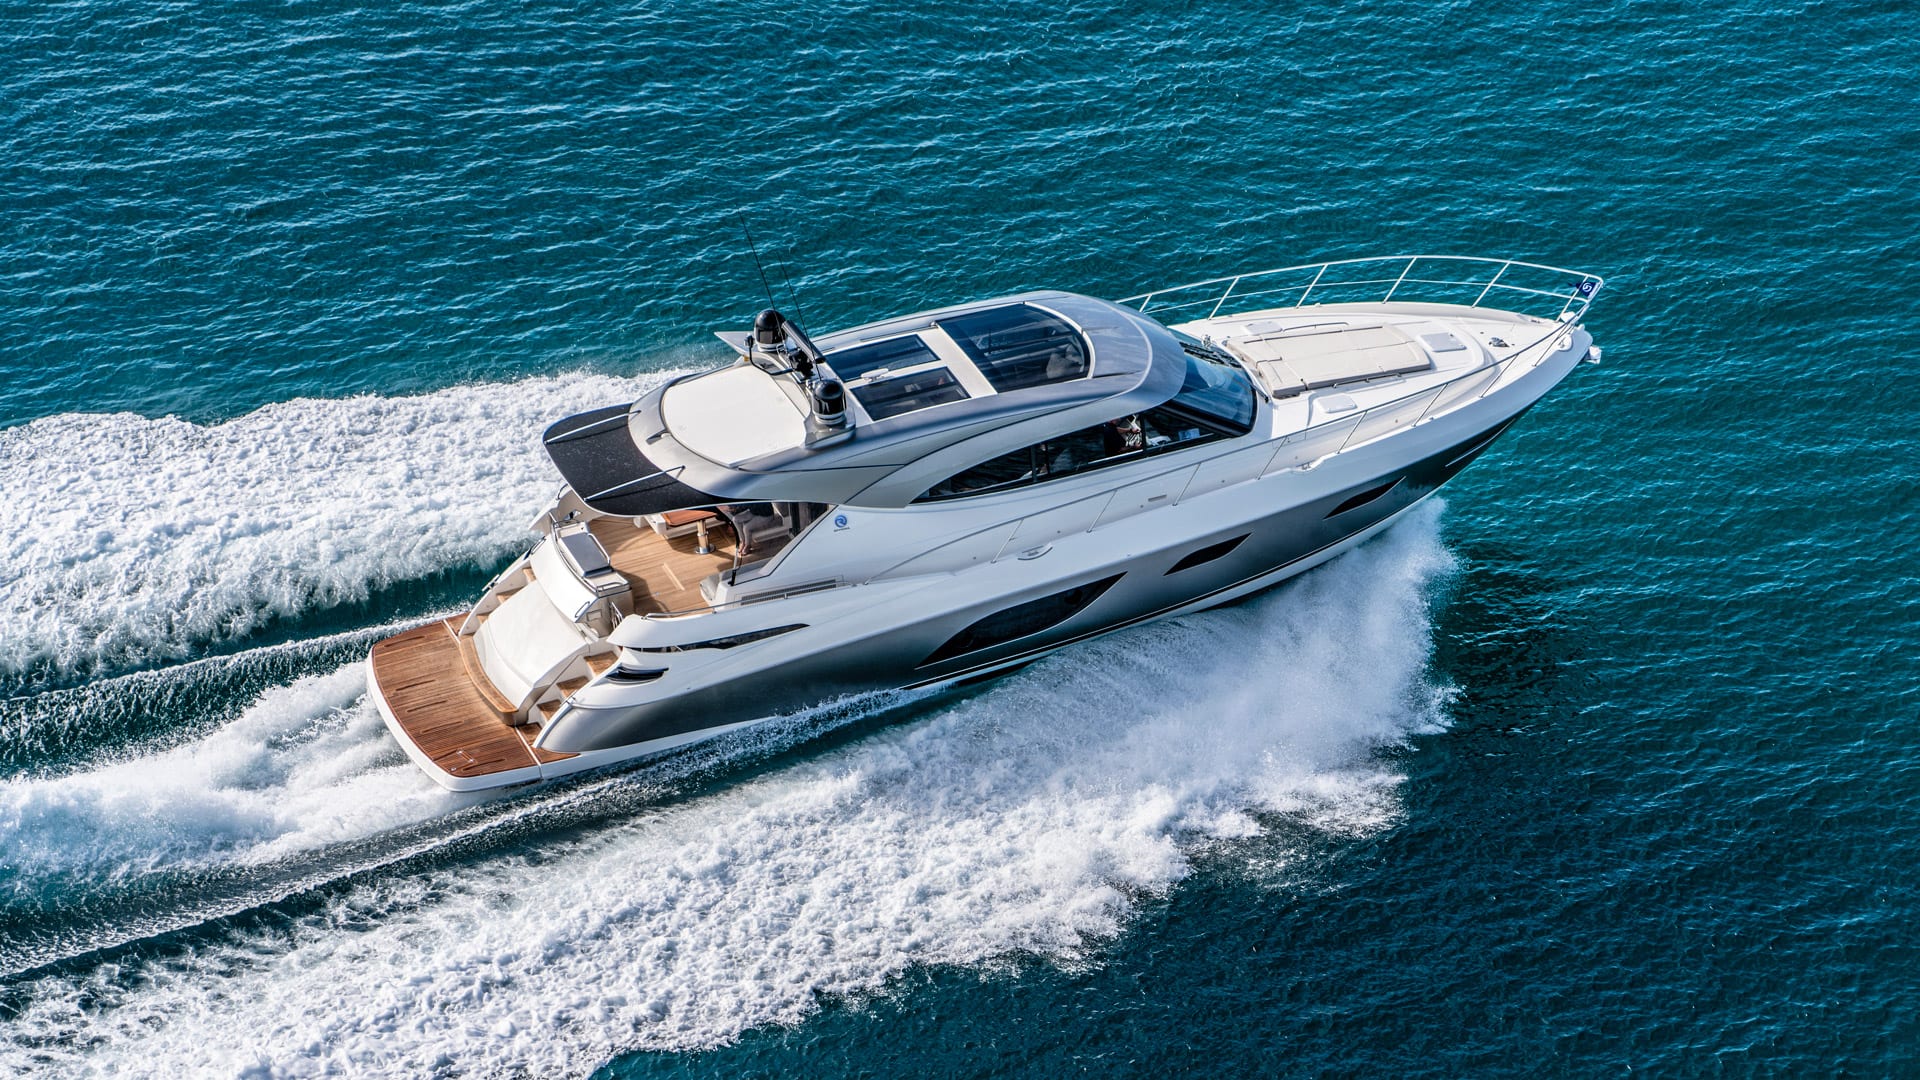 Riviera Yachts for Sale